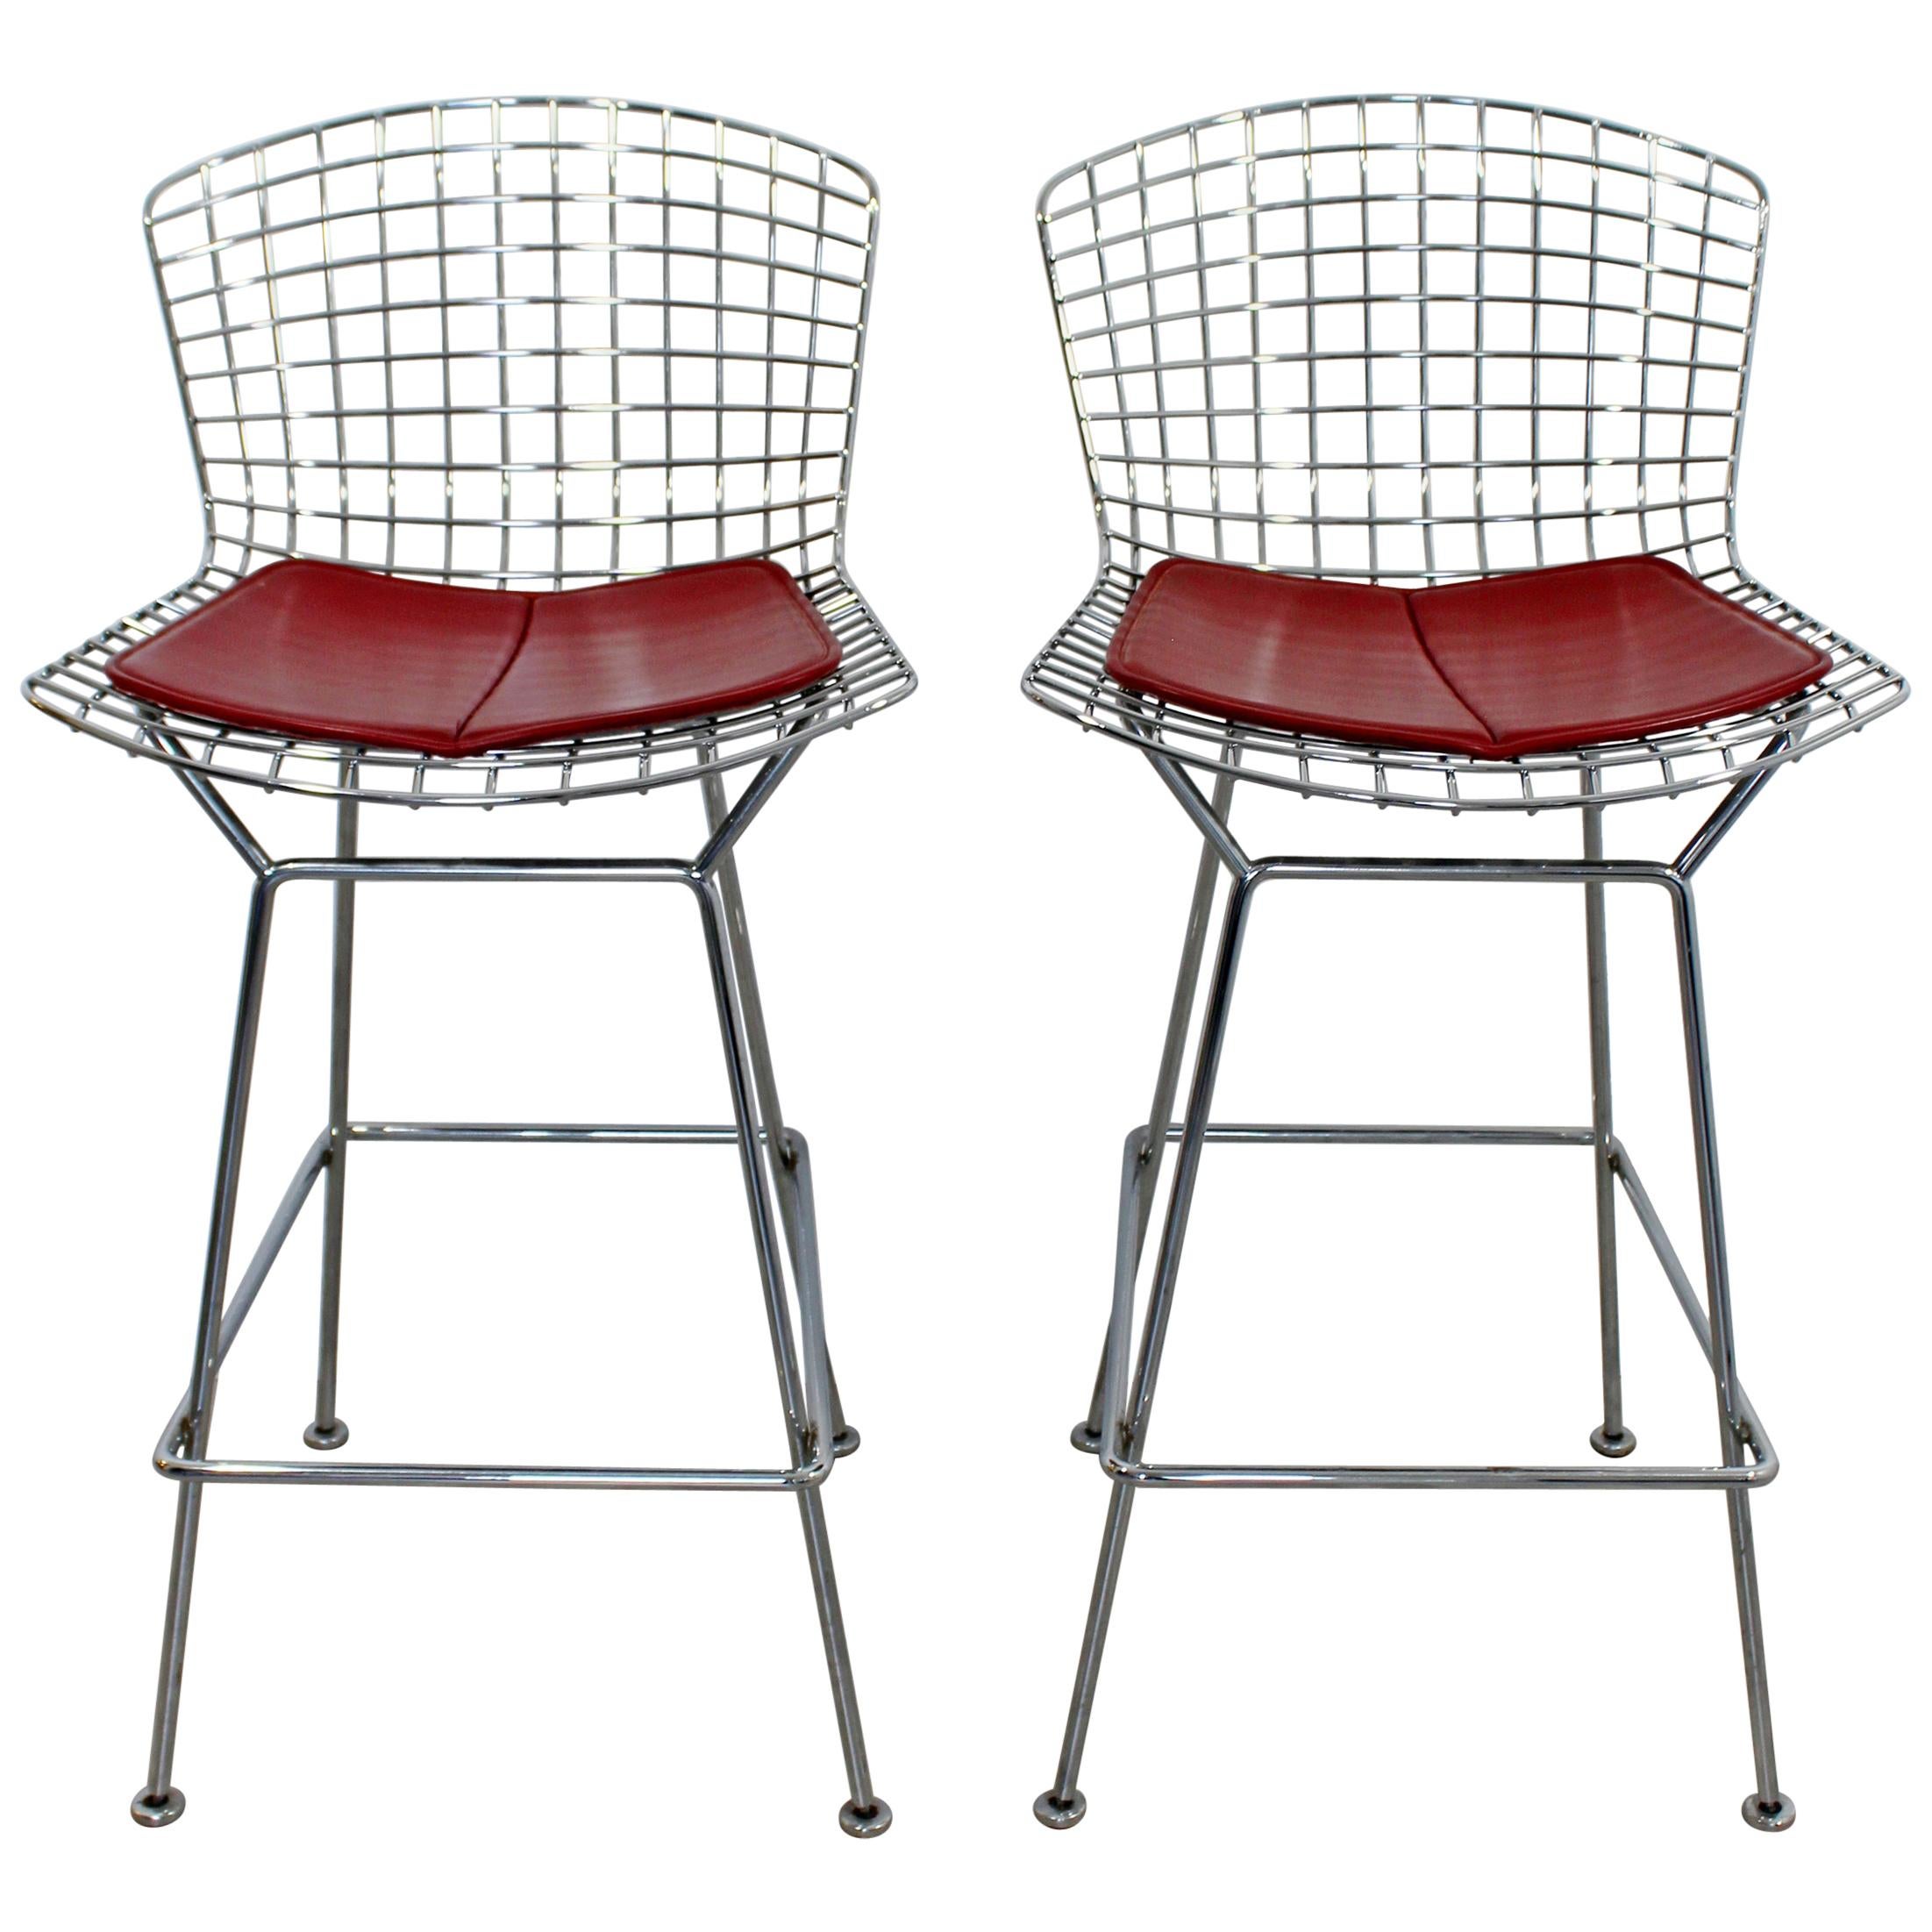 Mid-Century Modern Authentic Knoll Pair of Chrome Metal Wire Bar Stools, 1970s